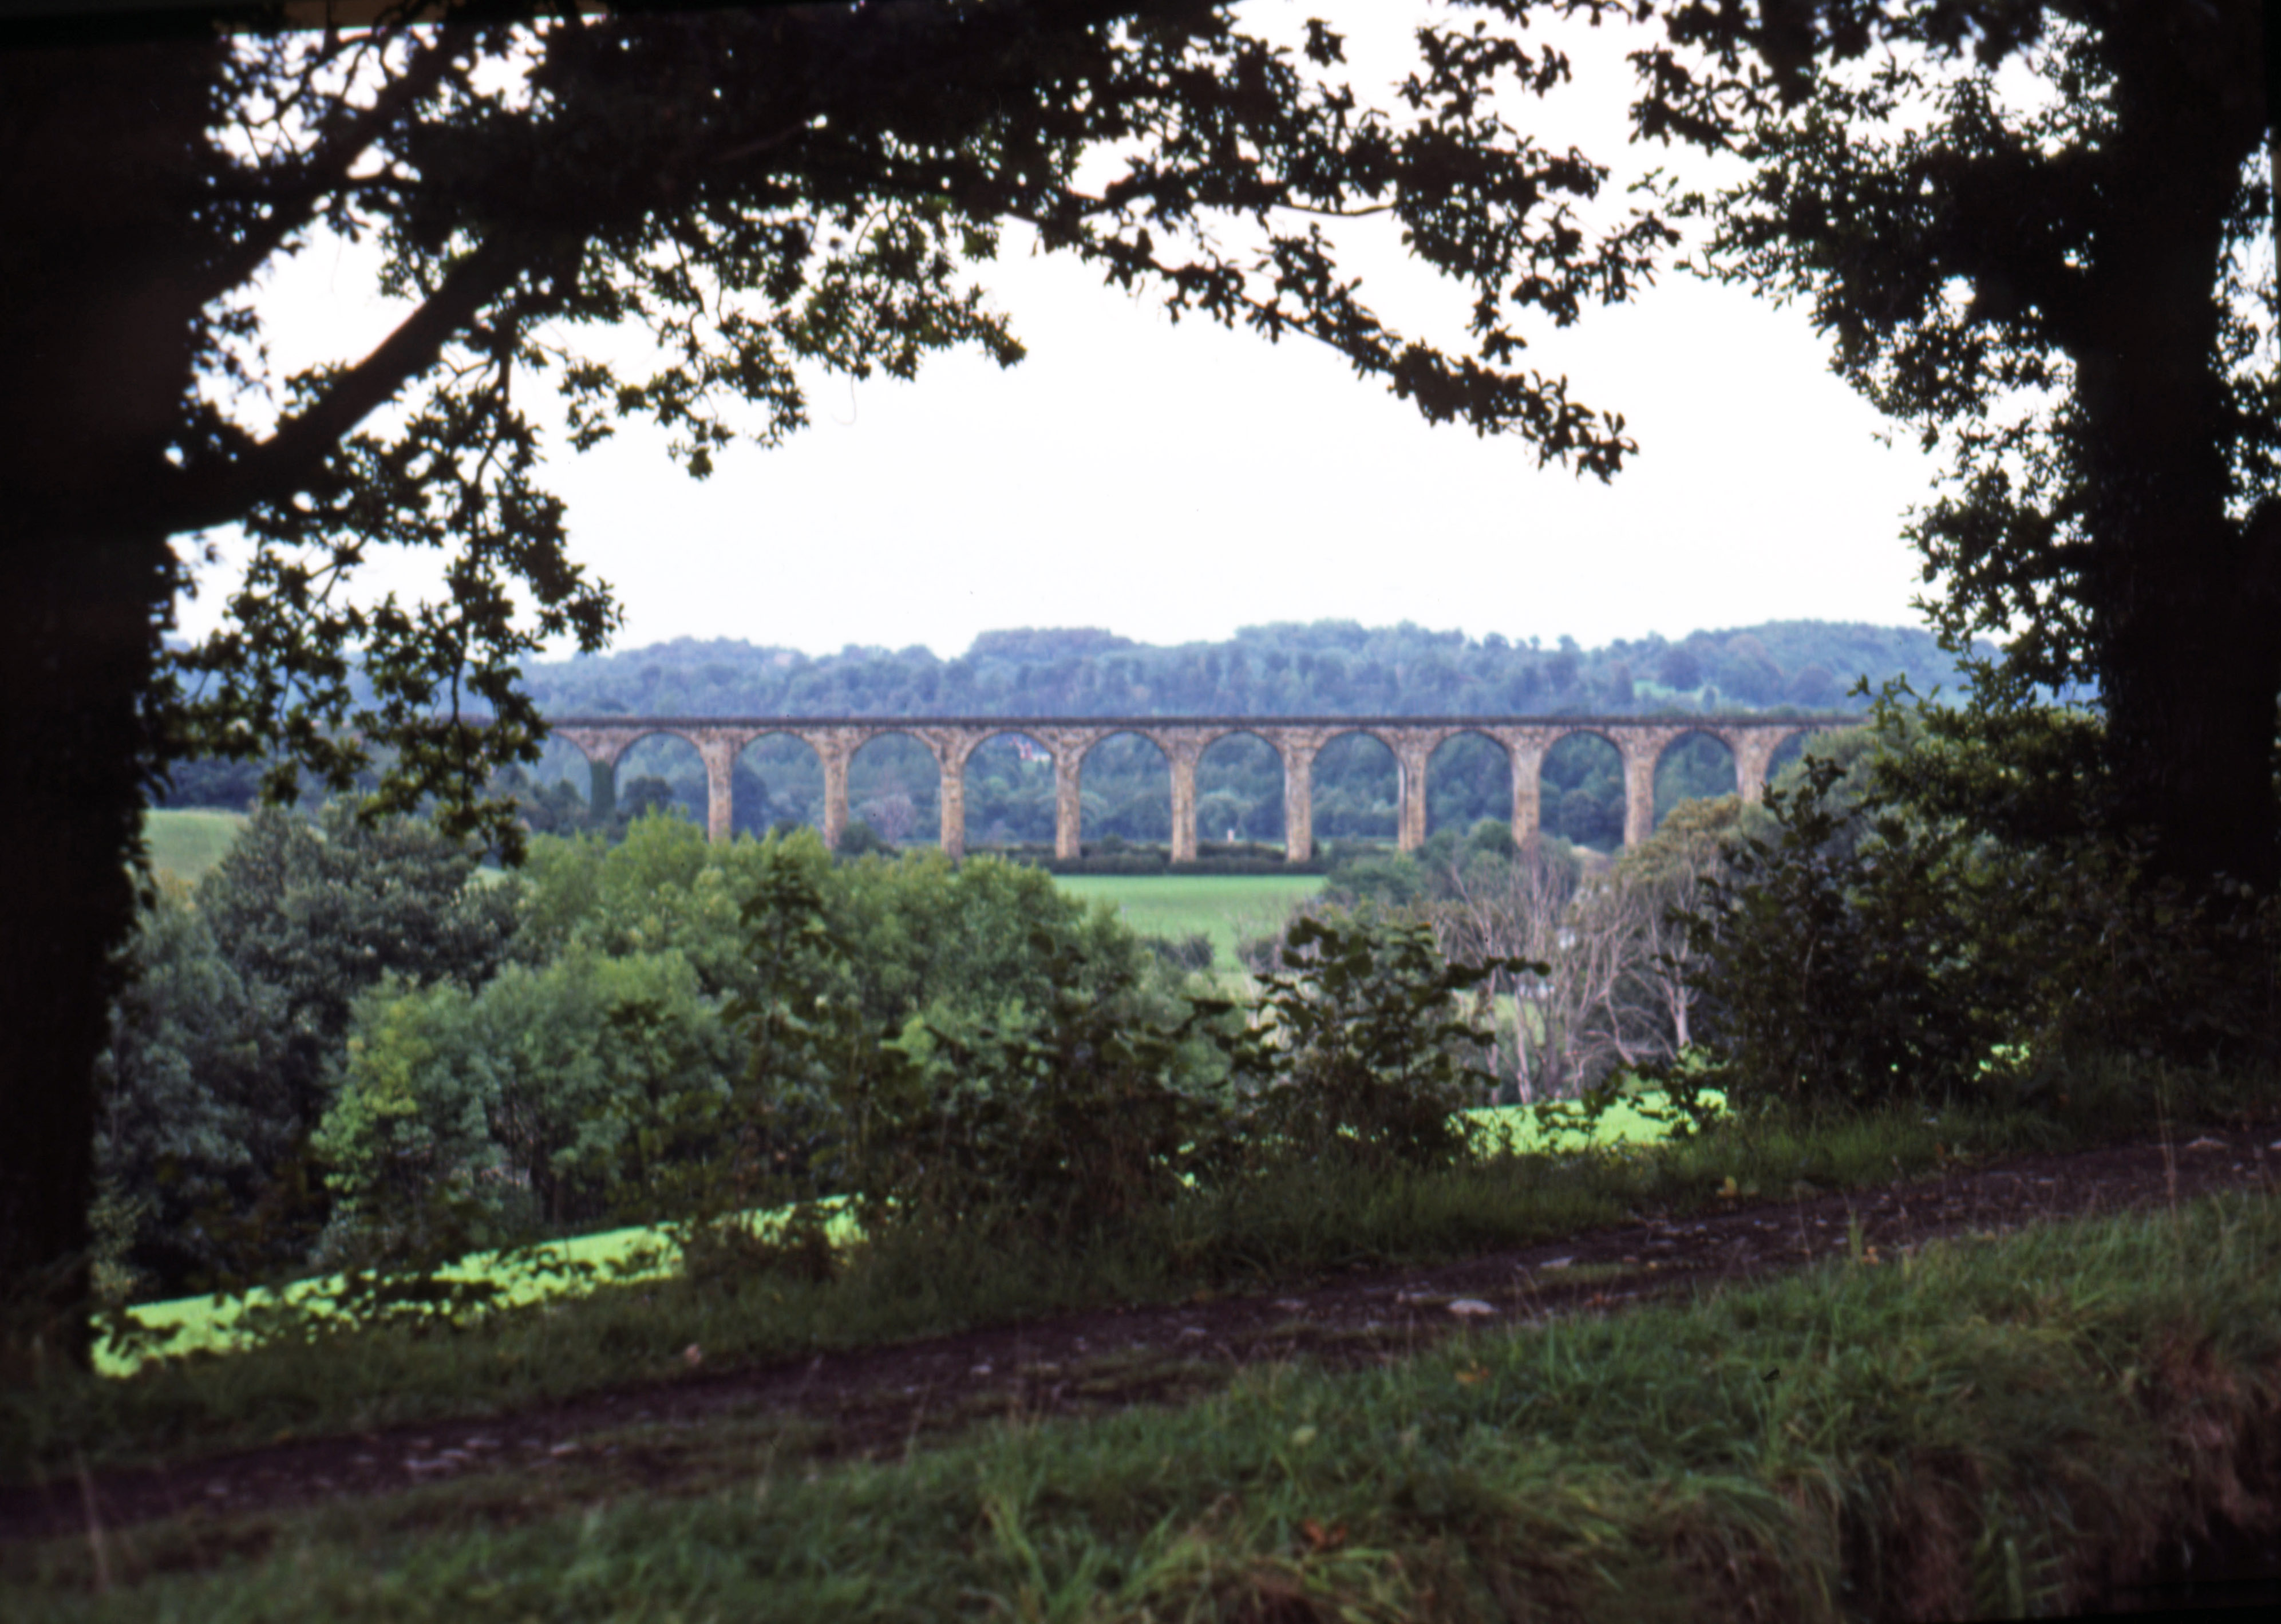 8408315 Sep 1984 A view from the side of the Pontcysyllte Aqueduct.